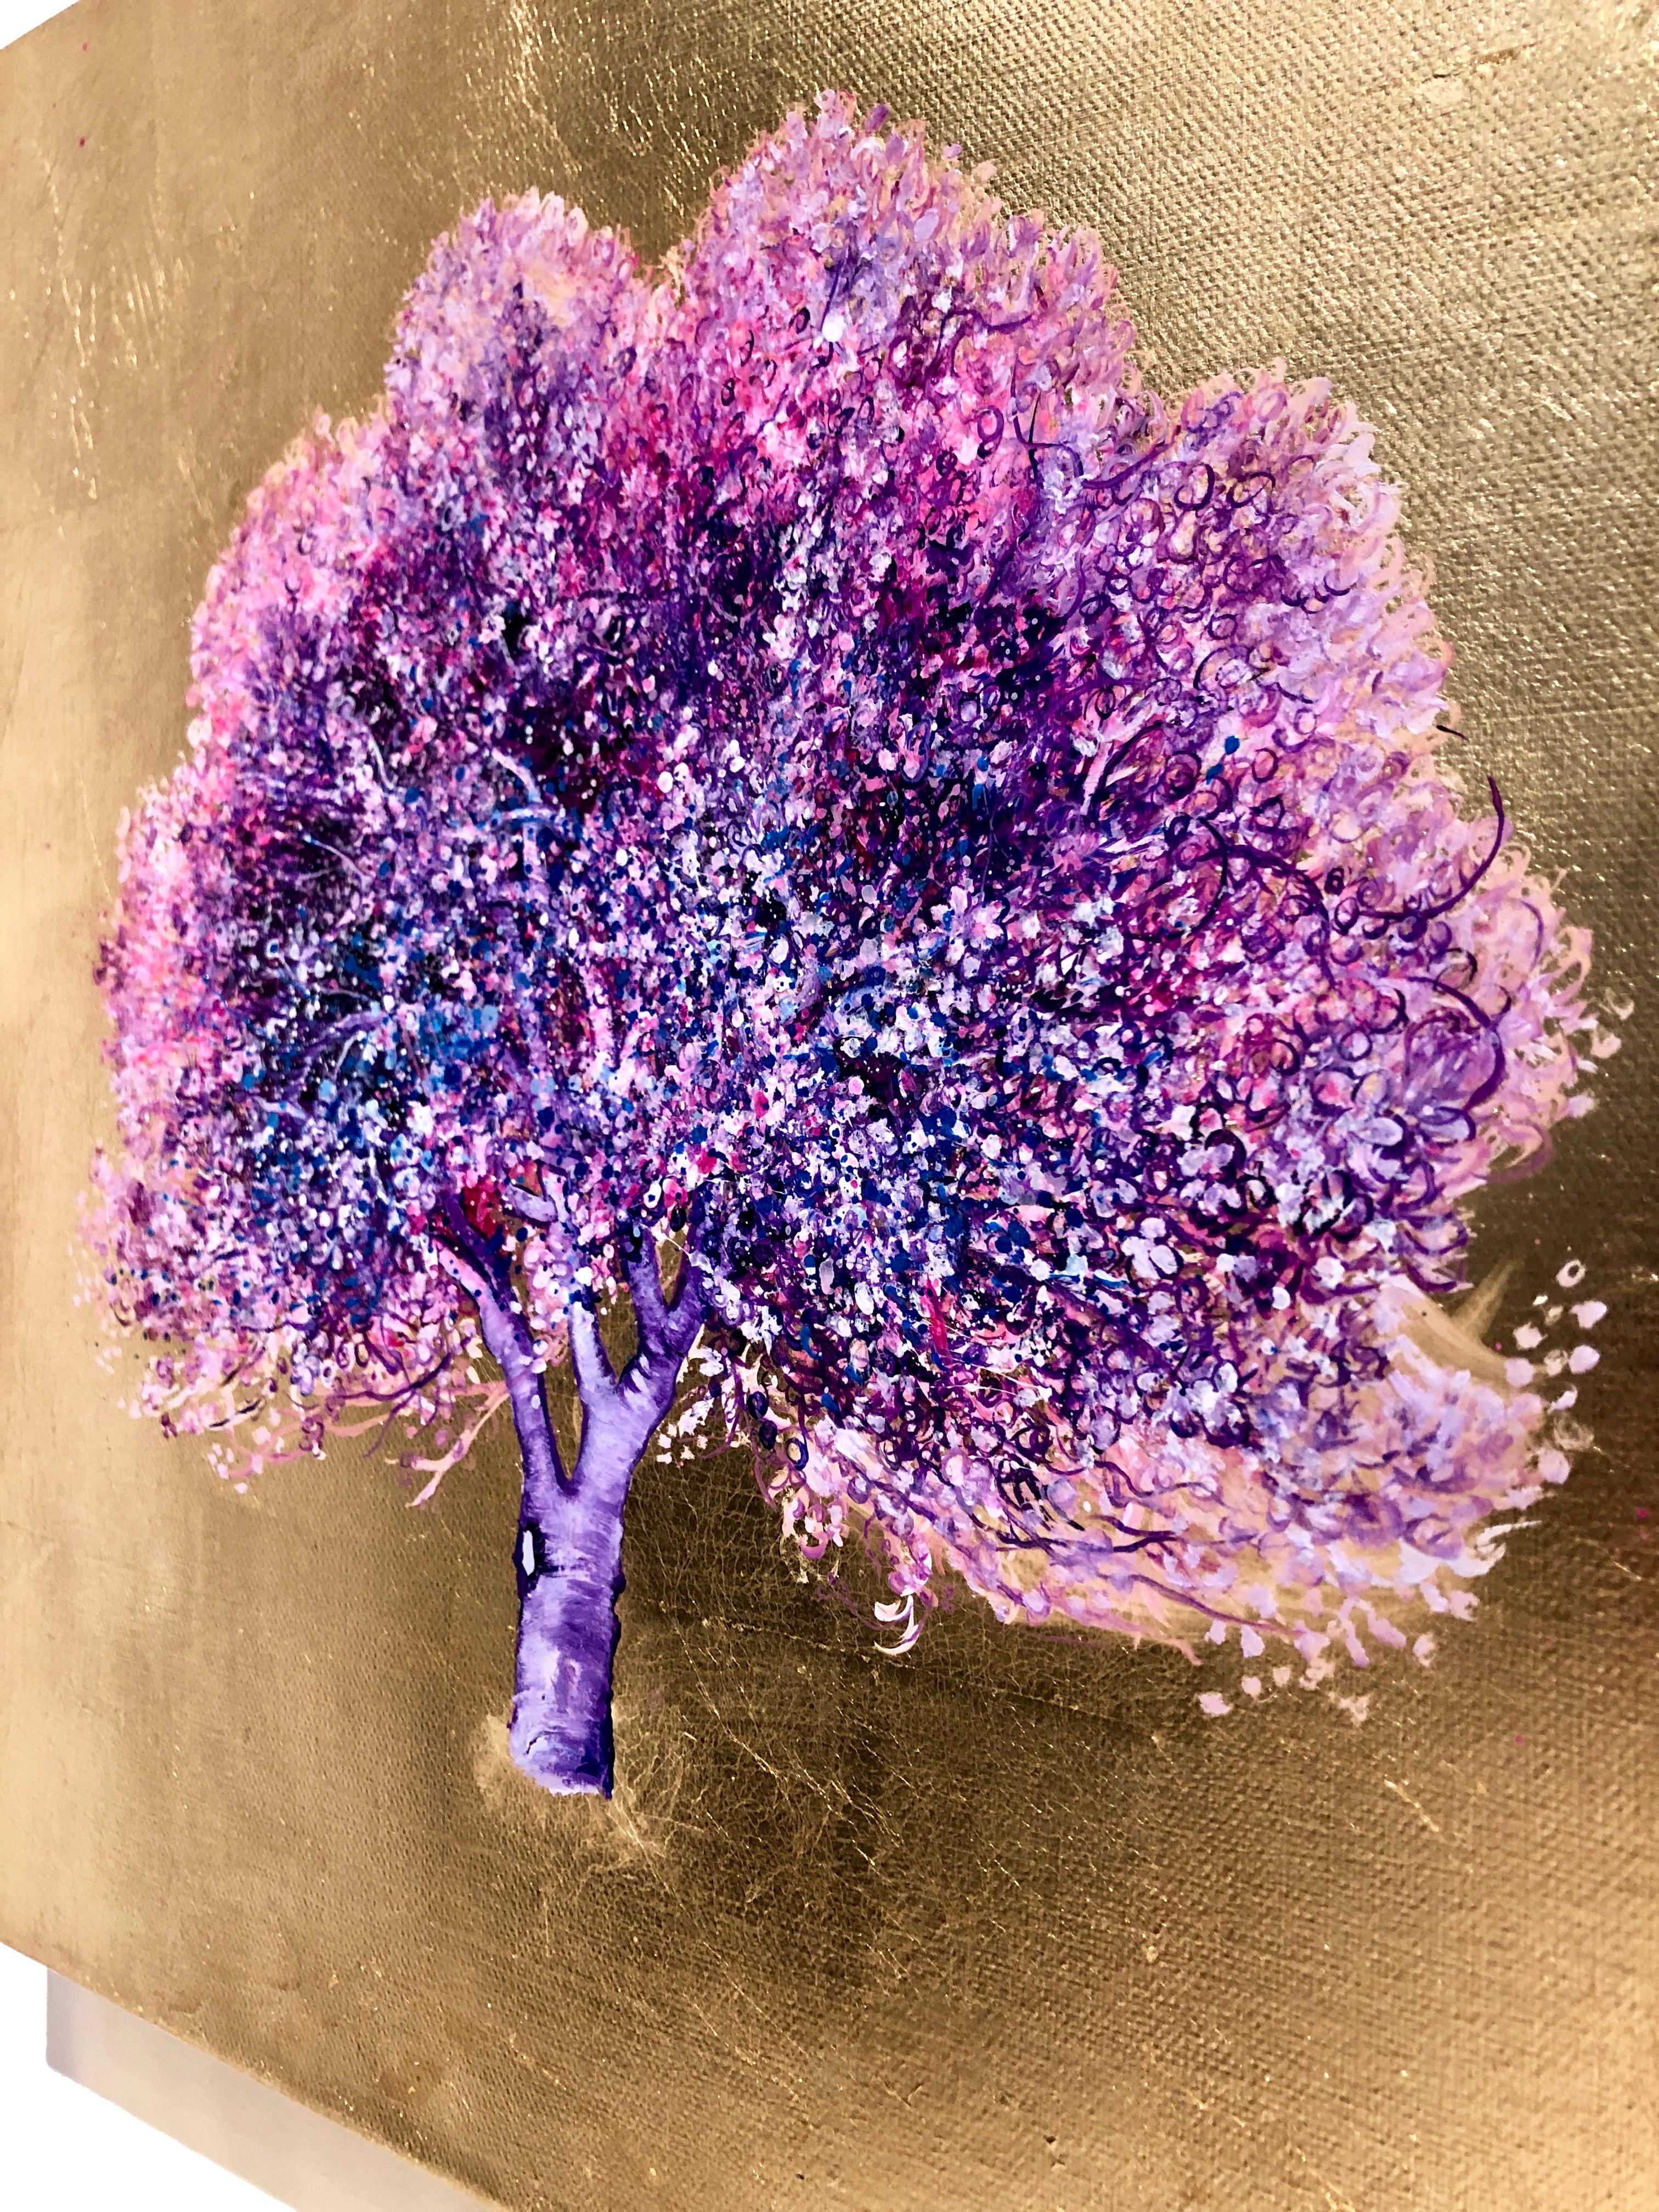 Let the Sunshine In, Purple Blossom Tree, Oil on Canvas Gold Leaf Painting  - Brown Landscape Painting by Anastasia Gklava